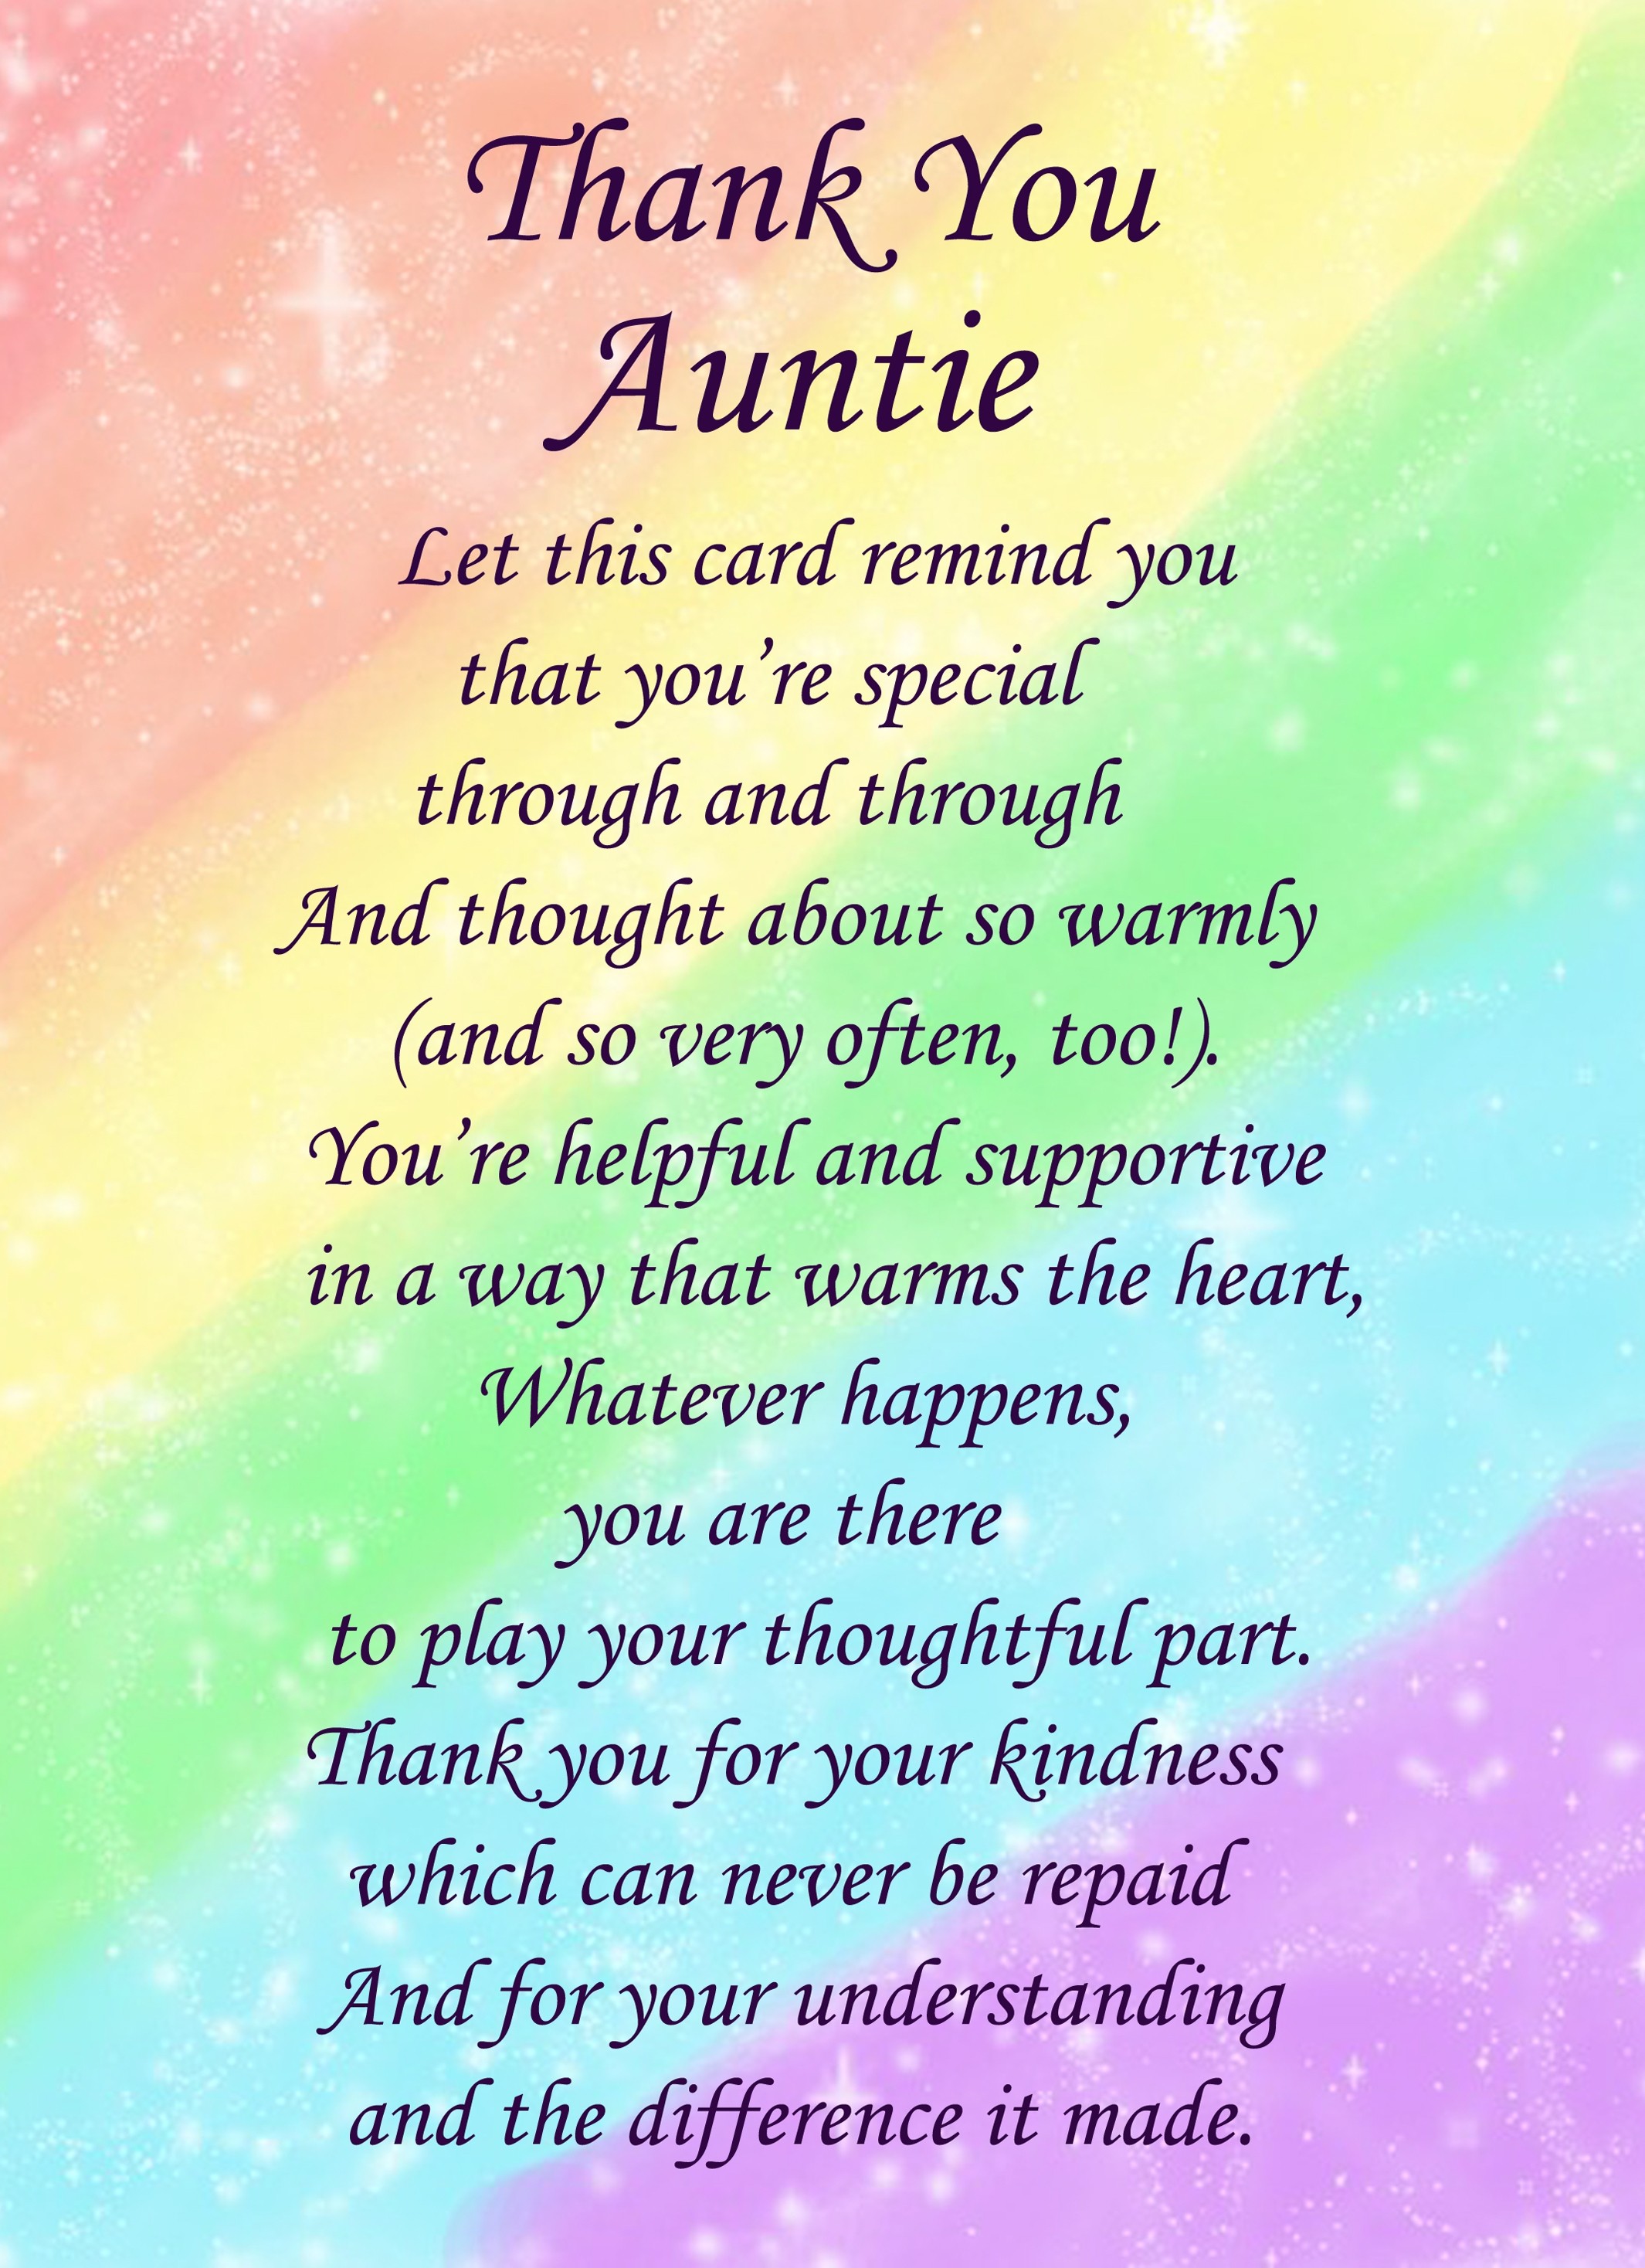 Thank You Auntie Poem Verse Greeting Card